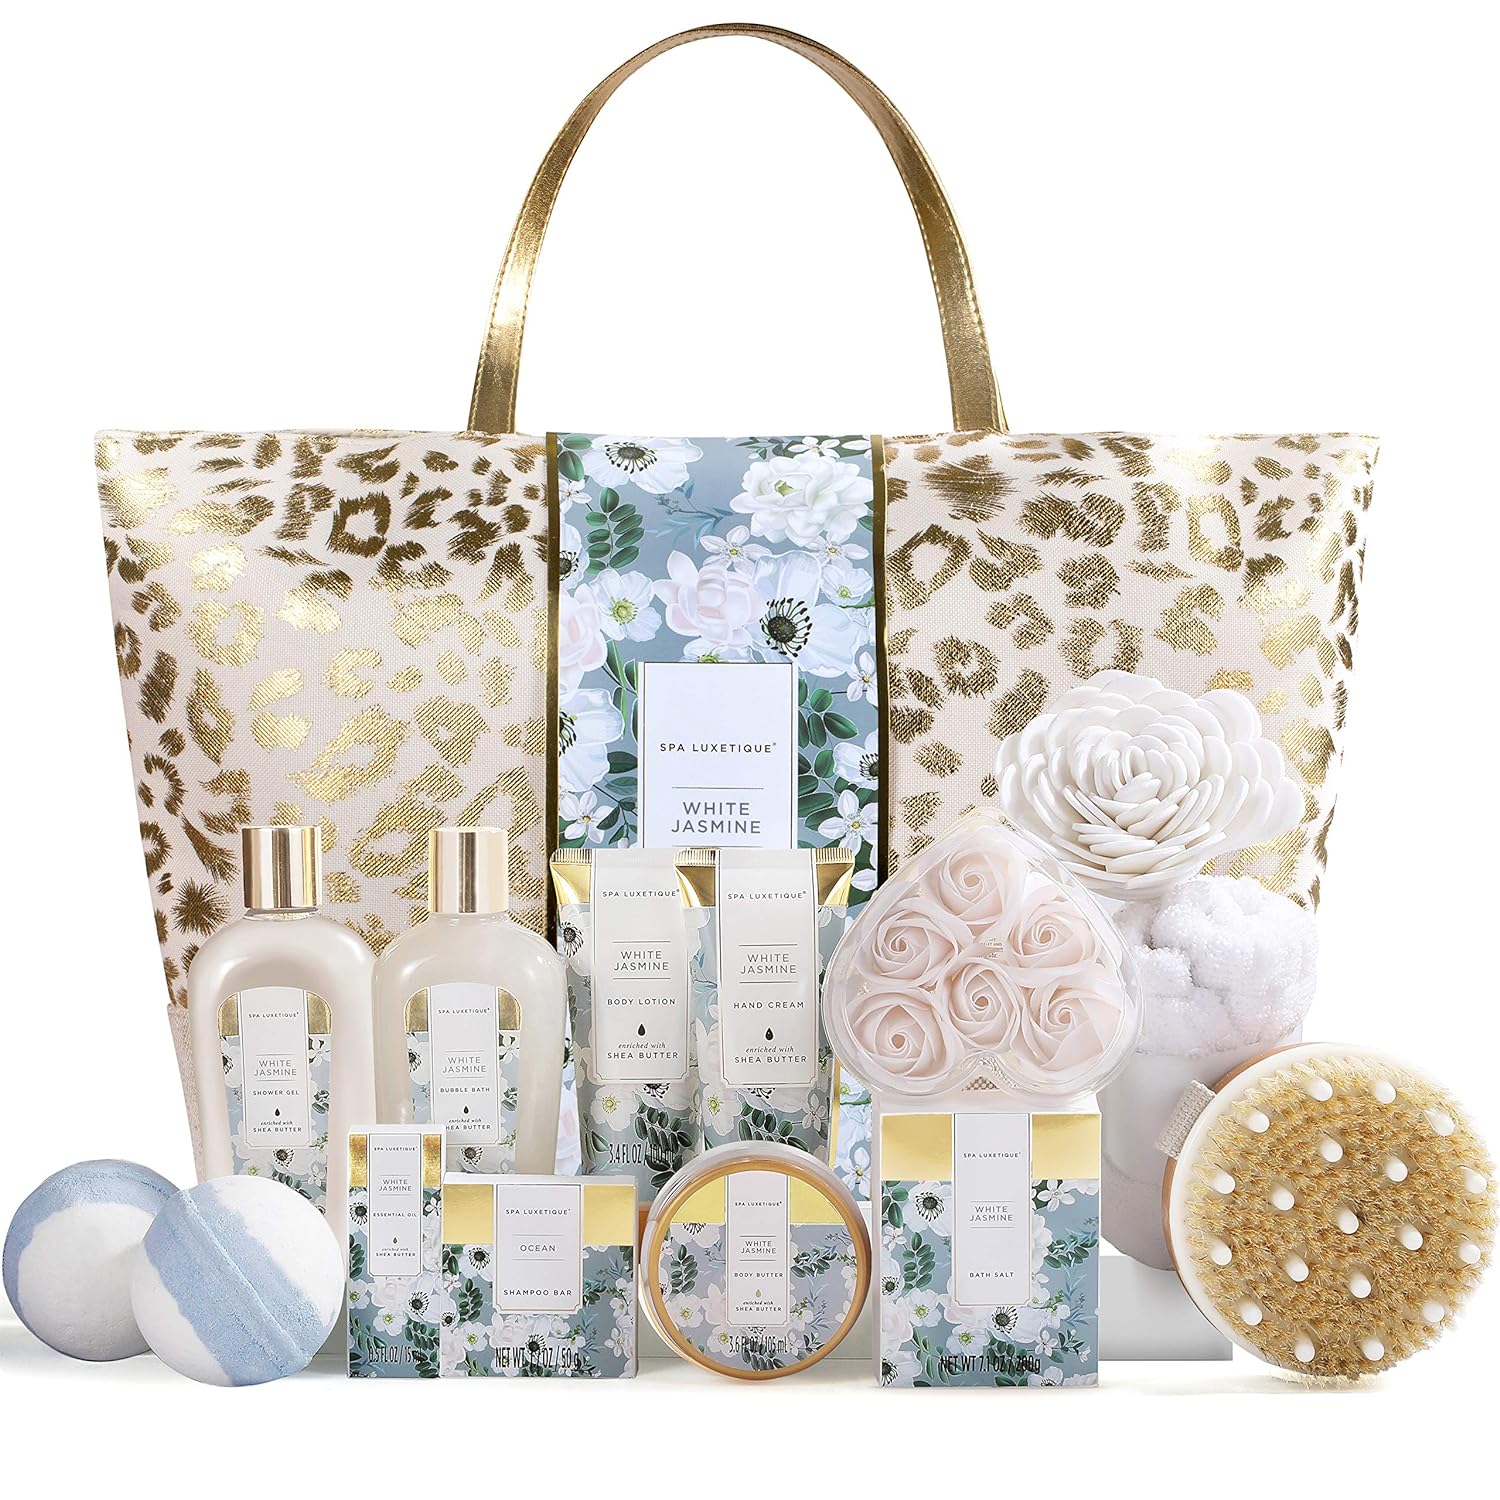 Spa Gift Baskets for Women, Spa Luxetique Gifts for Women, 15pcs Luxury Relaxing Spa Gift Set Includes Bath Bombs, Essential Oil, Hand Cream and Luxury Tote Bag, Christmas, Birthday Gifts for Women